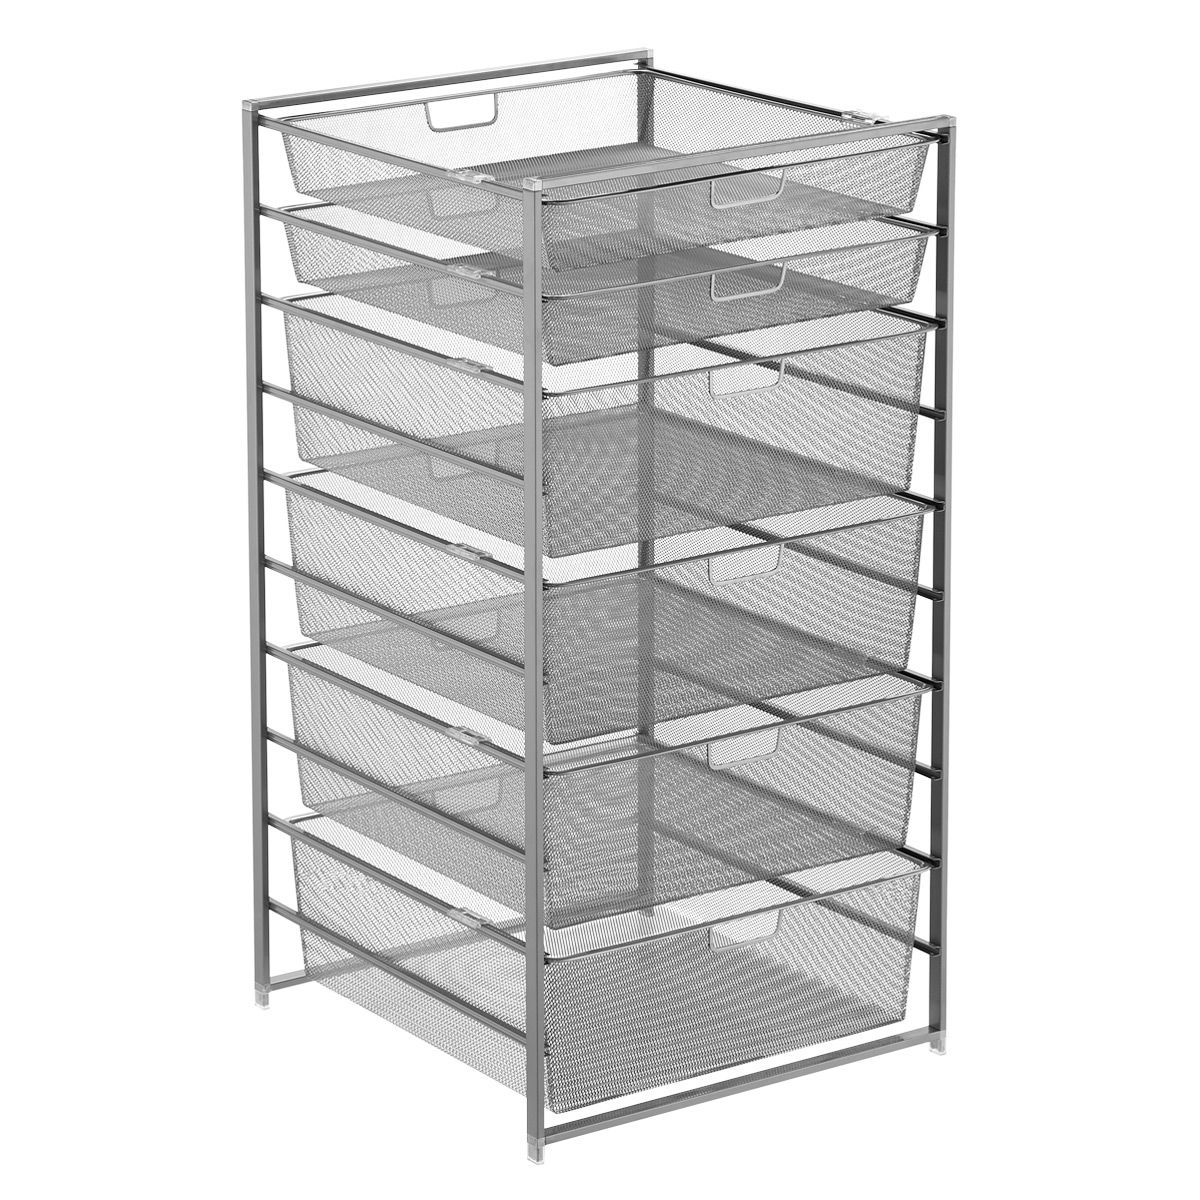 Elfa Wide Tall Drawer Solution | The Container Store